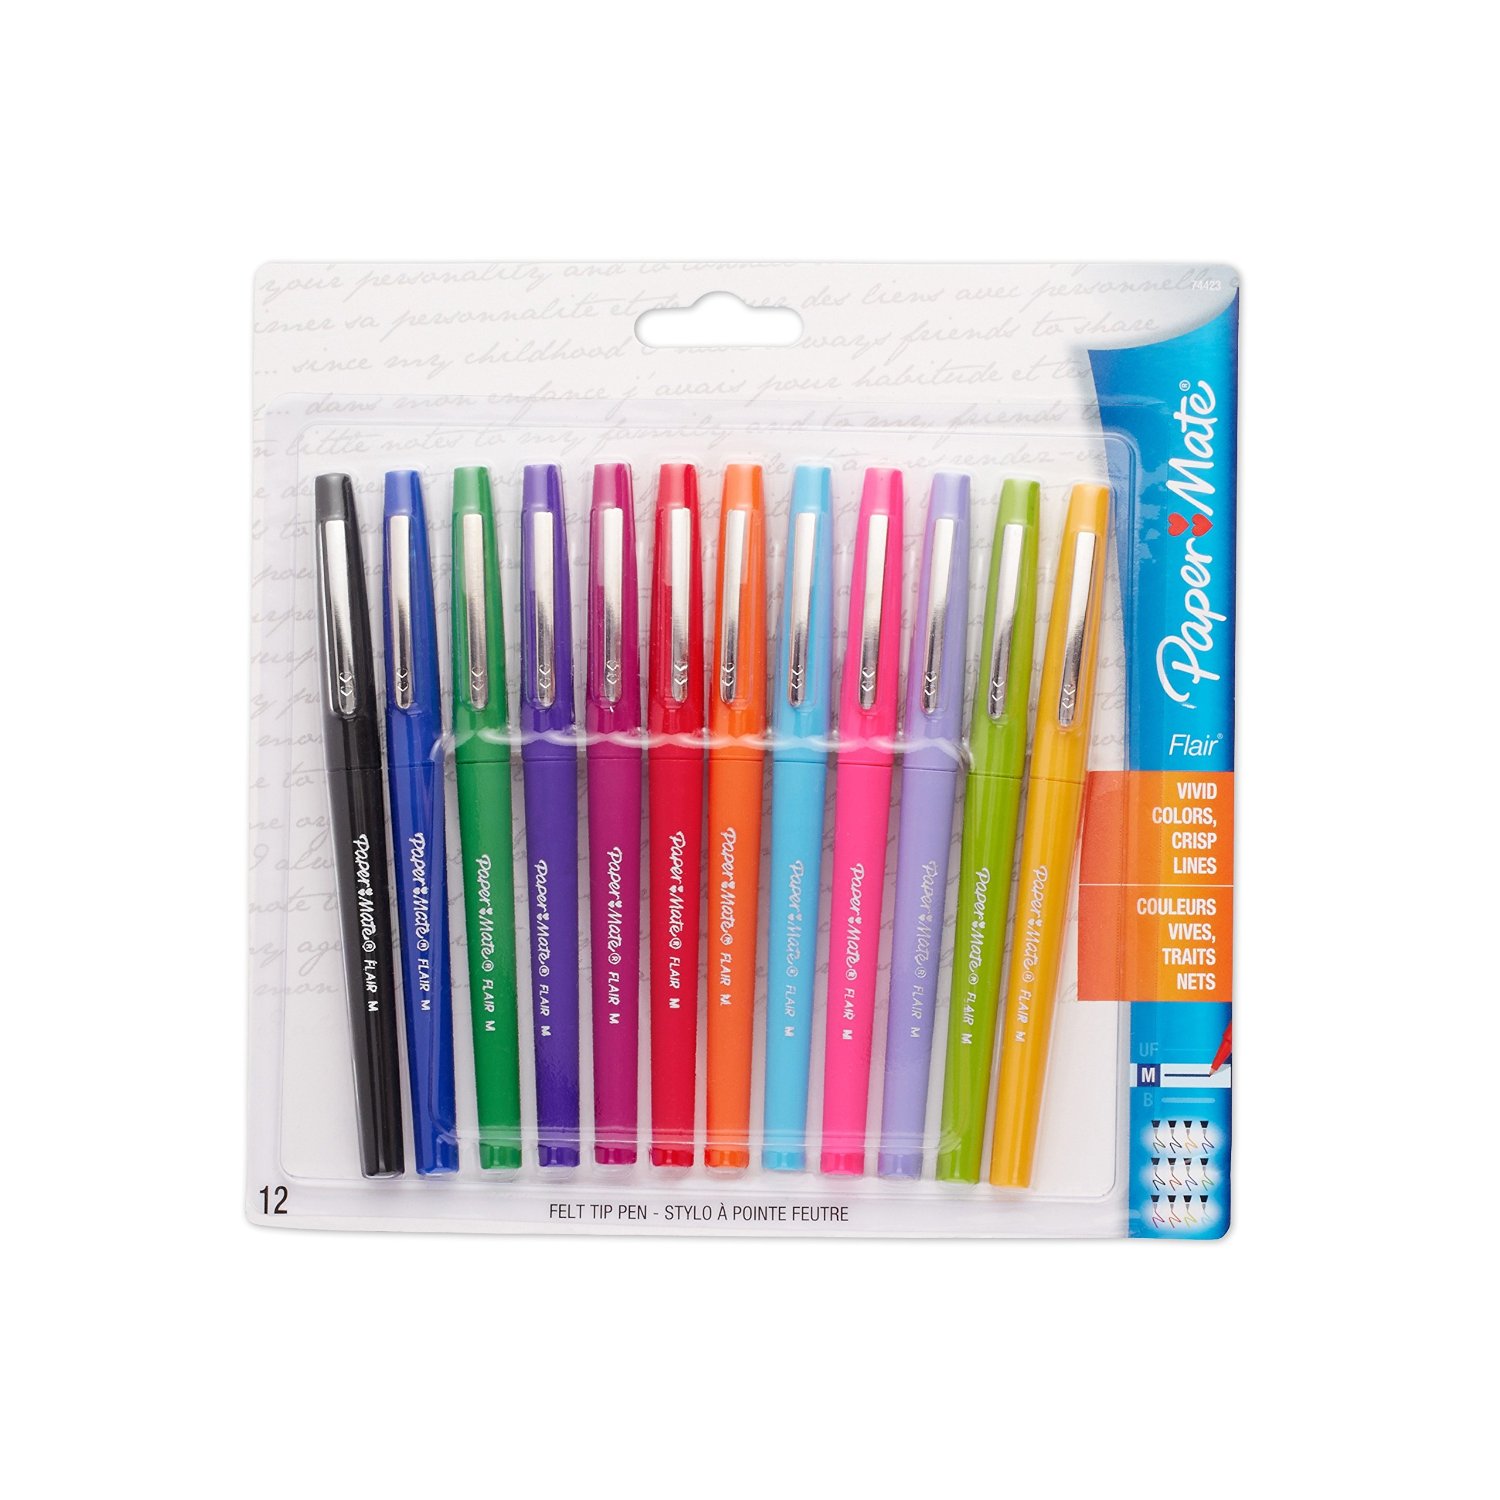 Girls will keep their schedules colorful and bright with this marker set